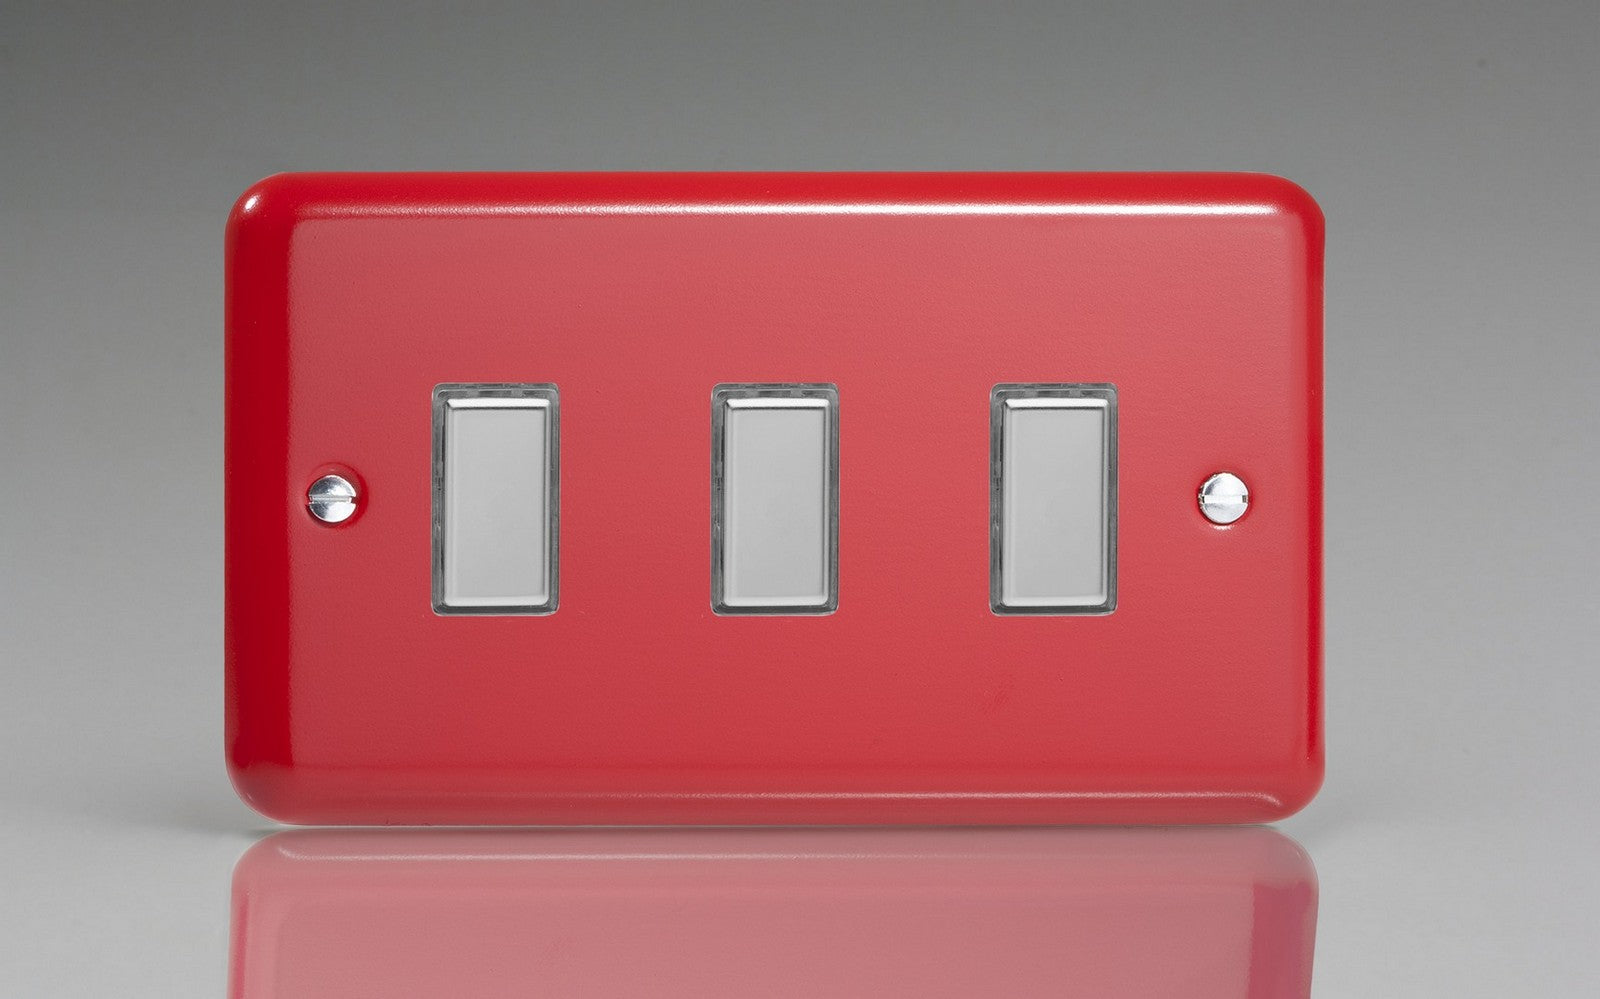 Varilight JYES003.PR Lily Pillar Box Red 3-Gang Tactile Touch Control Dimming Slave for use with Multi-Point Touch or Remote Master on 2-Way Circuits (Twin Plate)